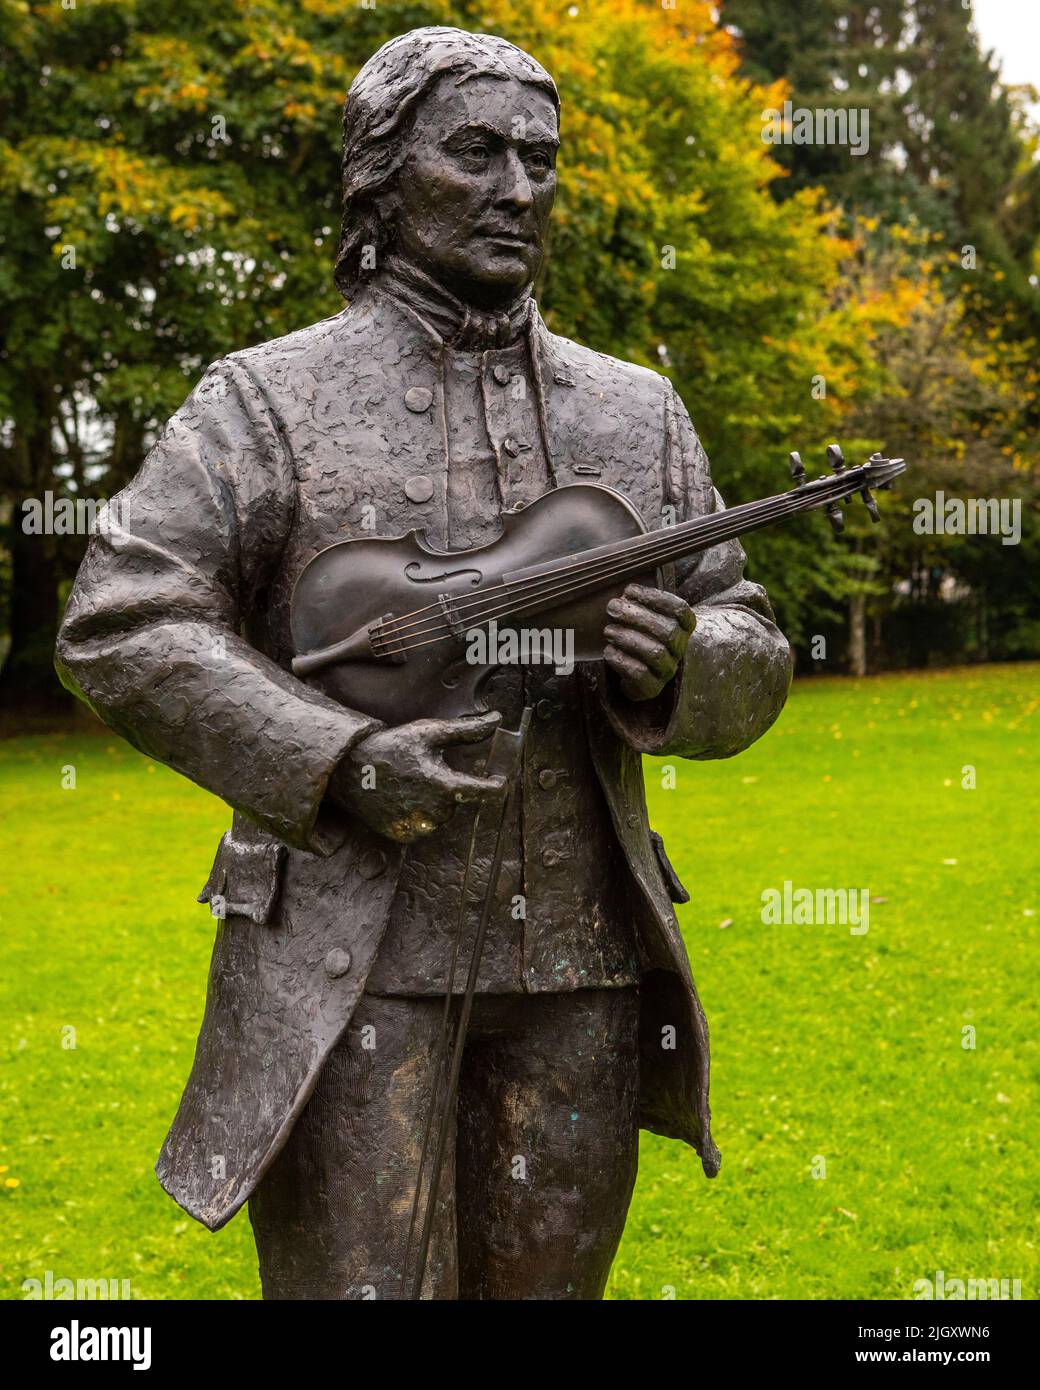 Dunkeld, Scotland - October 11th 2021: A statue of Niel Gow in the town of Dunkeld in Scotland, UK.  Gow was the most famous Scottish fiddler of the 1 Stock Photo